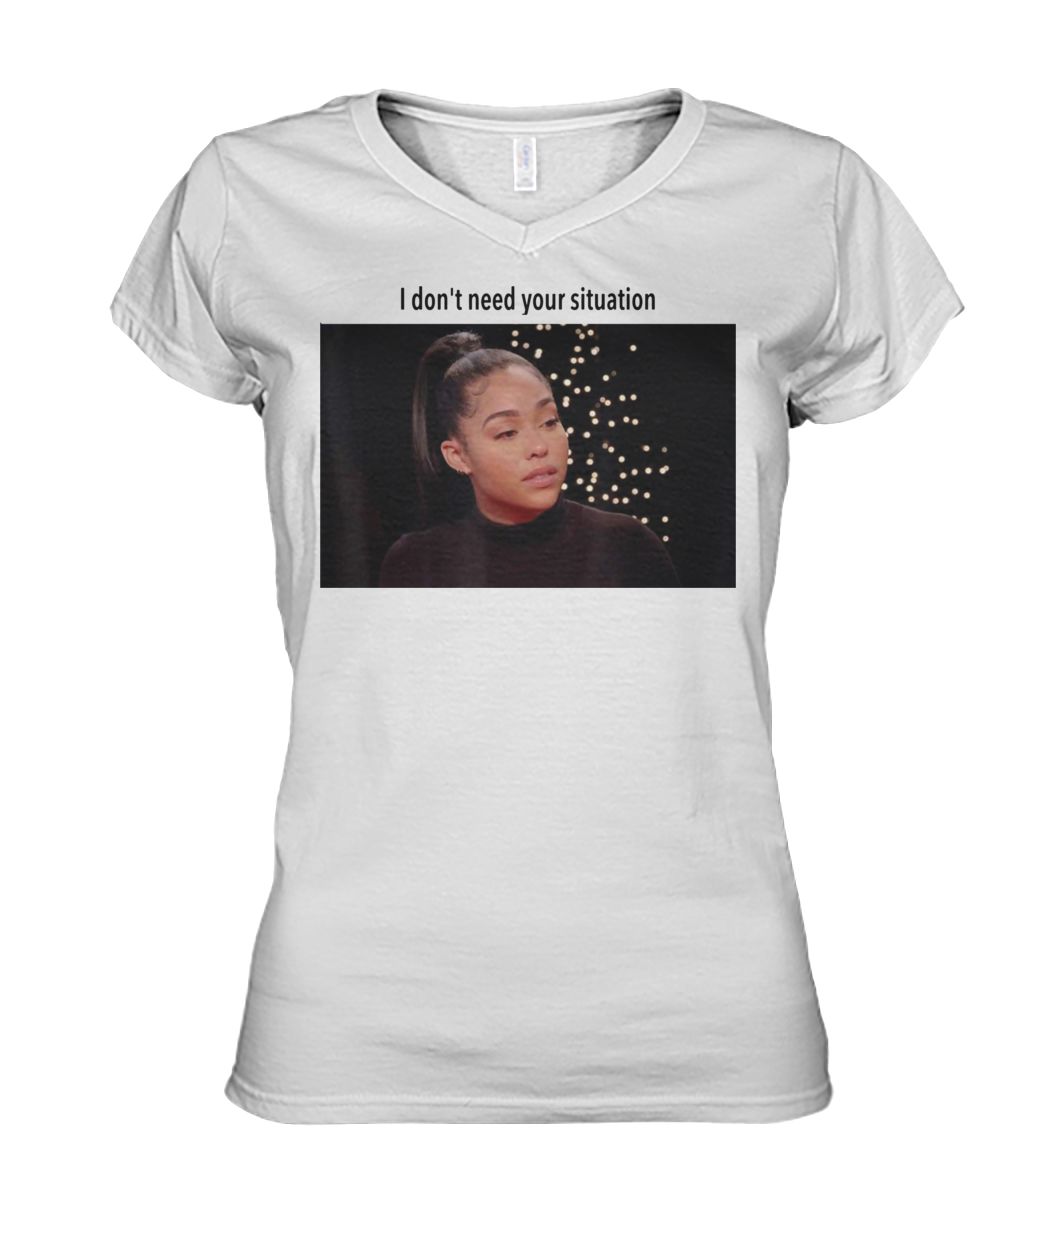 Jordyn woods I don't need your situation women's v-neck